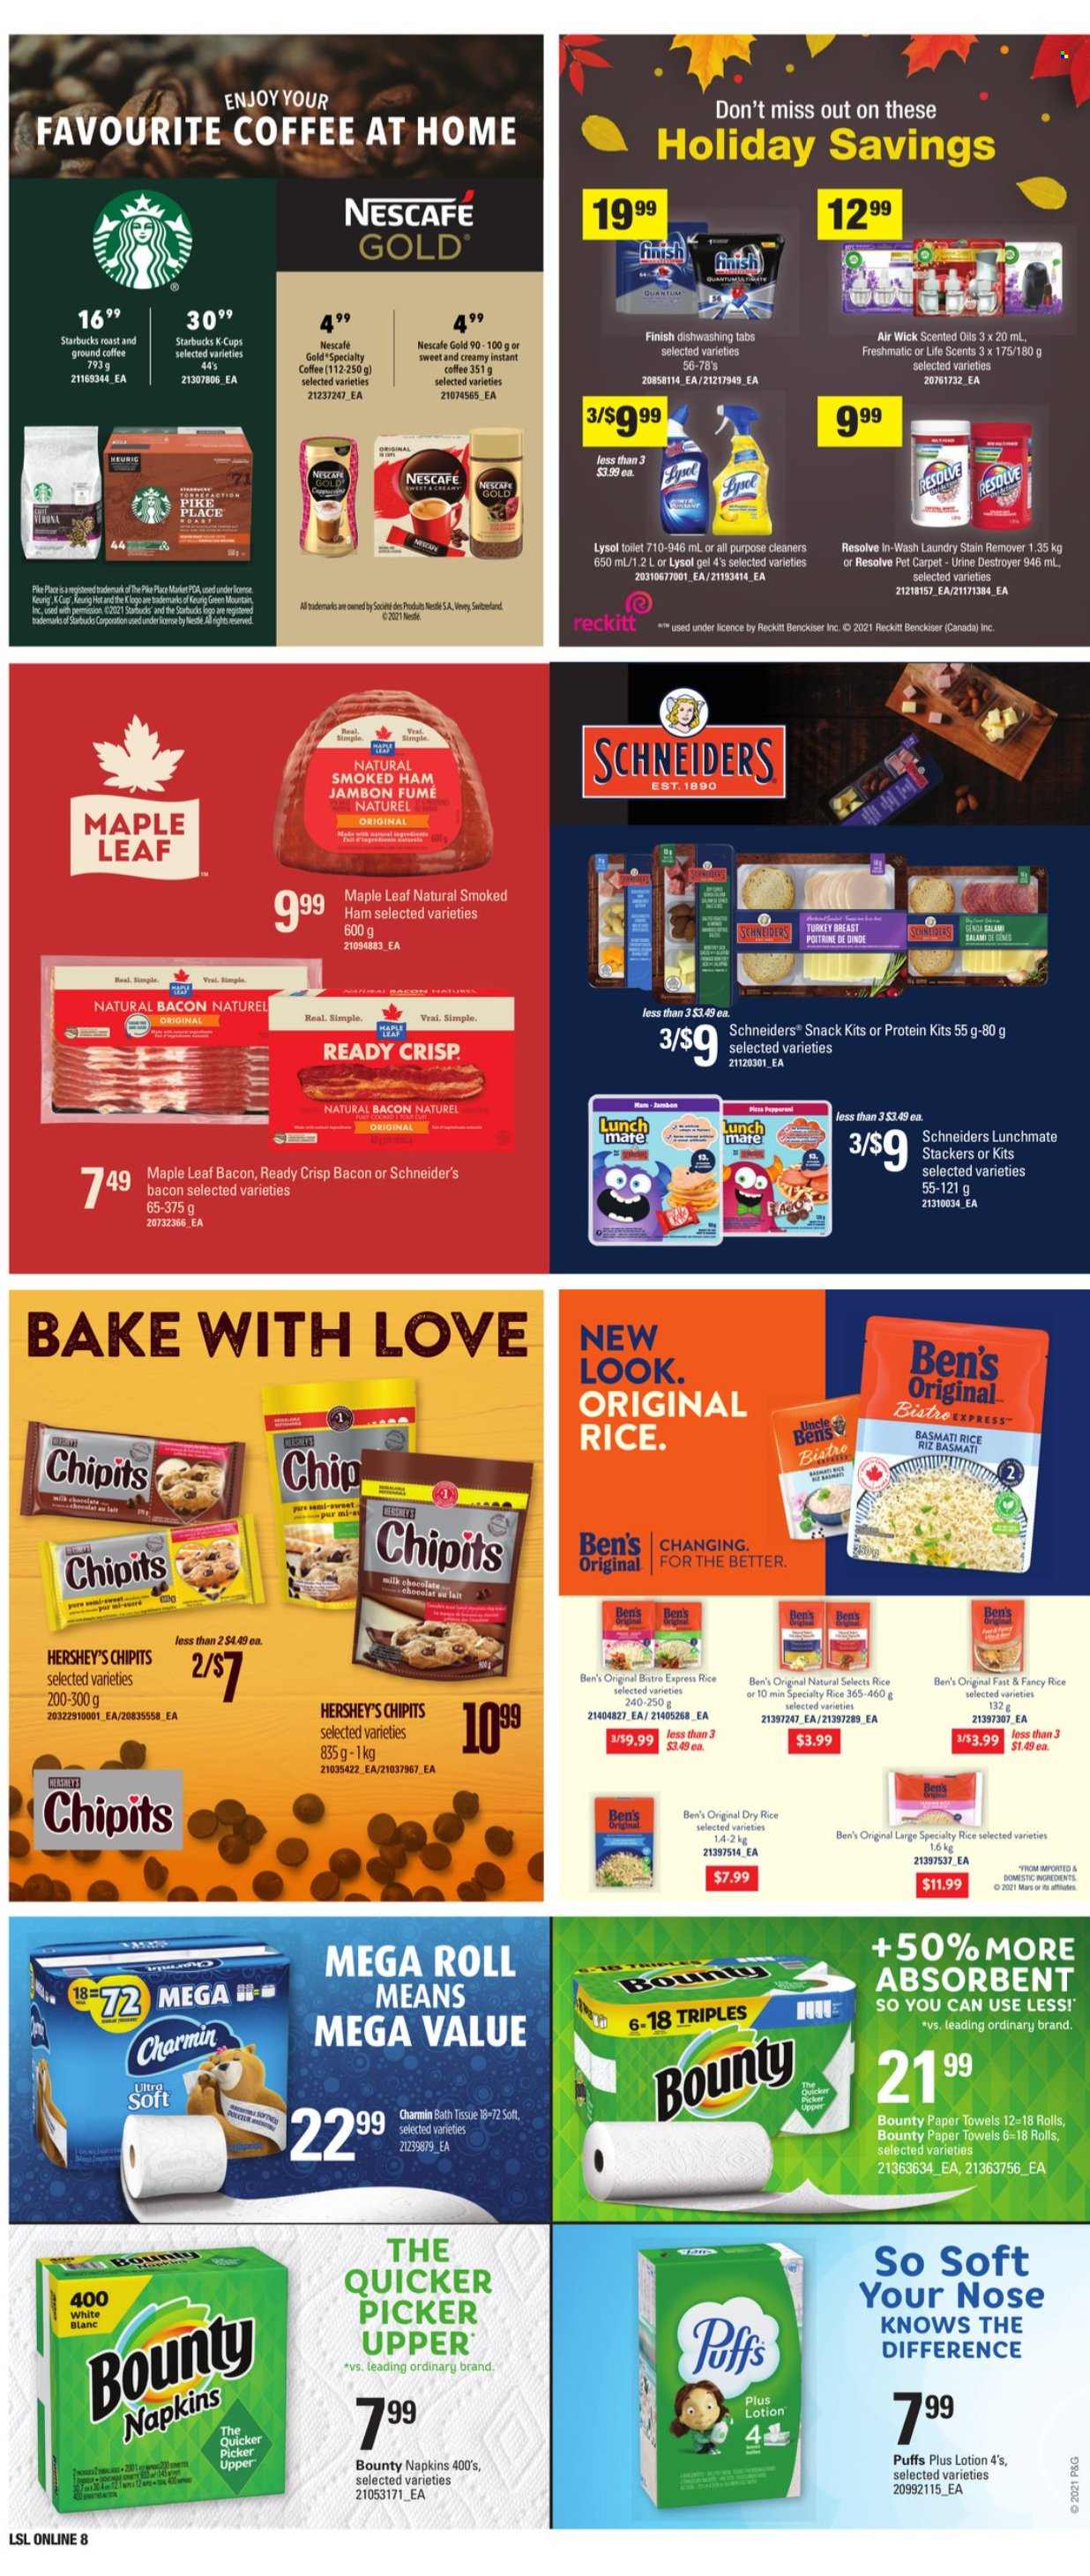 thumbnail - Loblaws Flyer - October 14, 2021 - October 20, 2021 - Sales products - puffs, bacon, salami, ham, smoked ham, Hershey's, milk chocolate, chocolate, snack, Bounty, Mars, Uncle Ben's, basmati rice, instant coffee, ground coffee, coffee capsules, Starbucks, K-Cups, Keurig, Green Mountain, turkey breast, turkey, napkins, bath tissue, kitchen towels, paper towels, Charmin, stain remover, Lysol, Nescafé. Page 13.